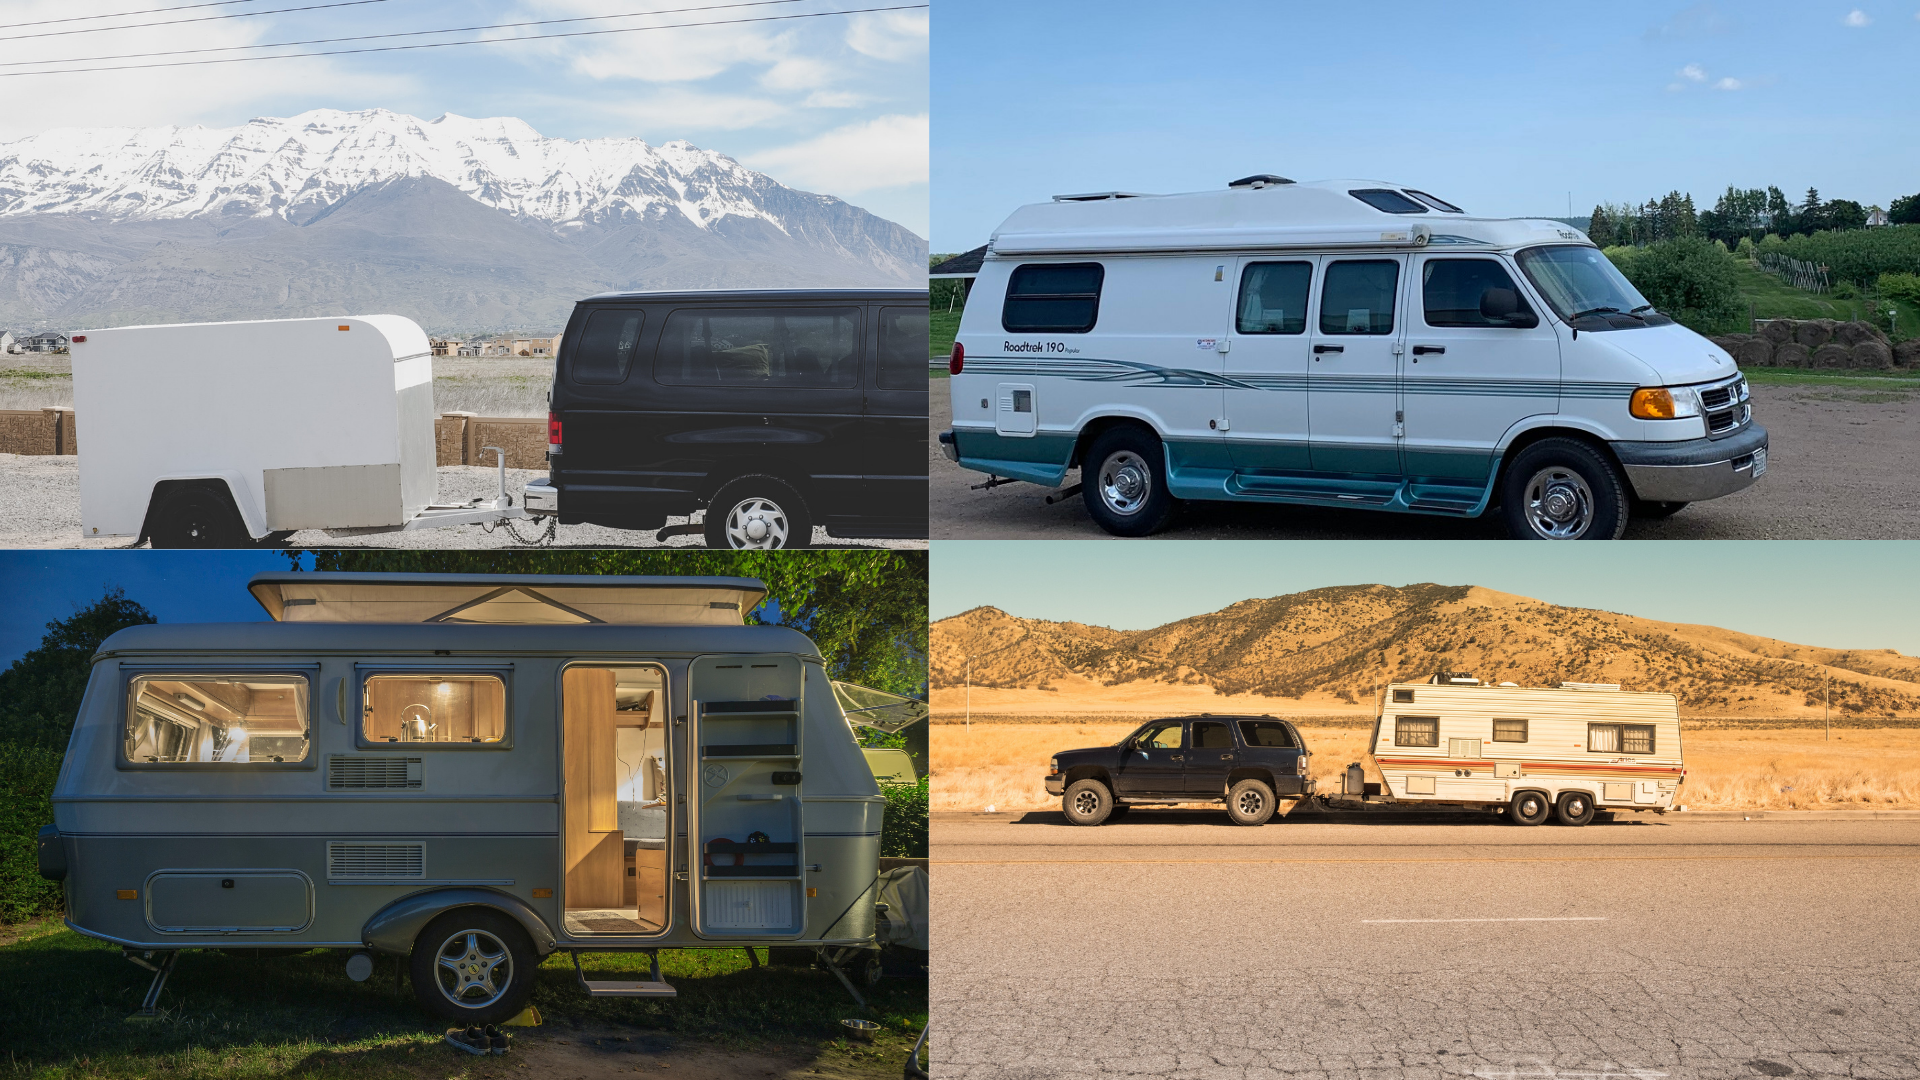 Self-contained RV featured image